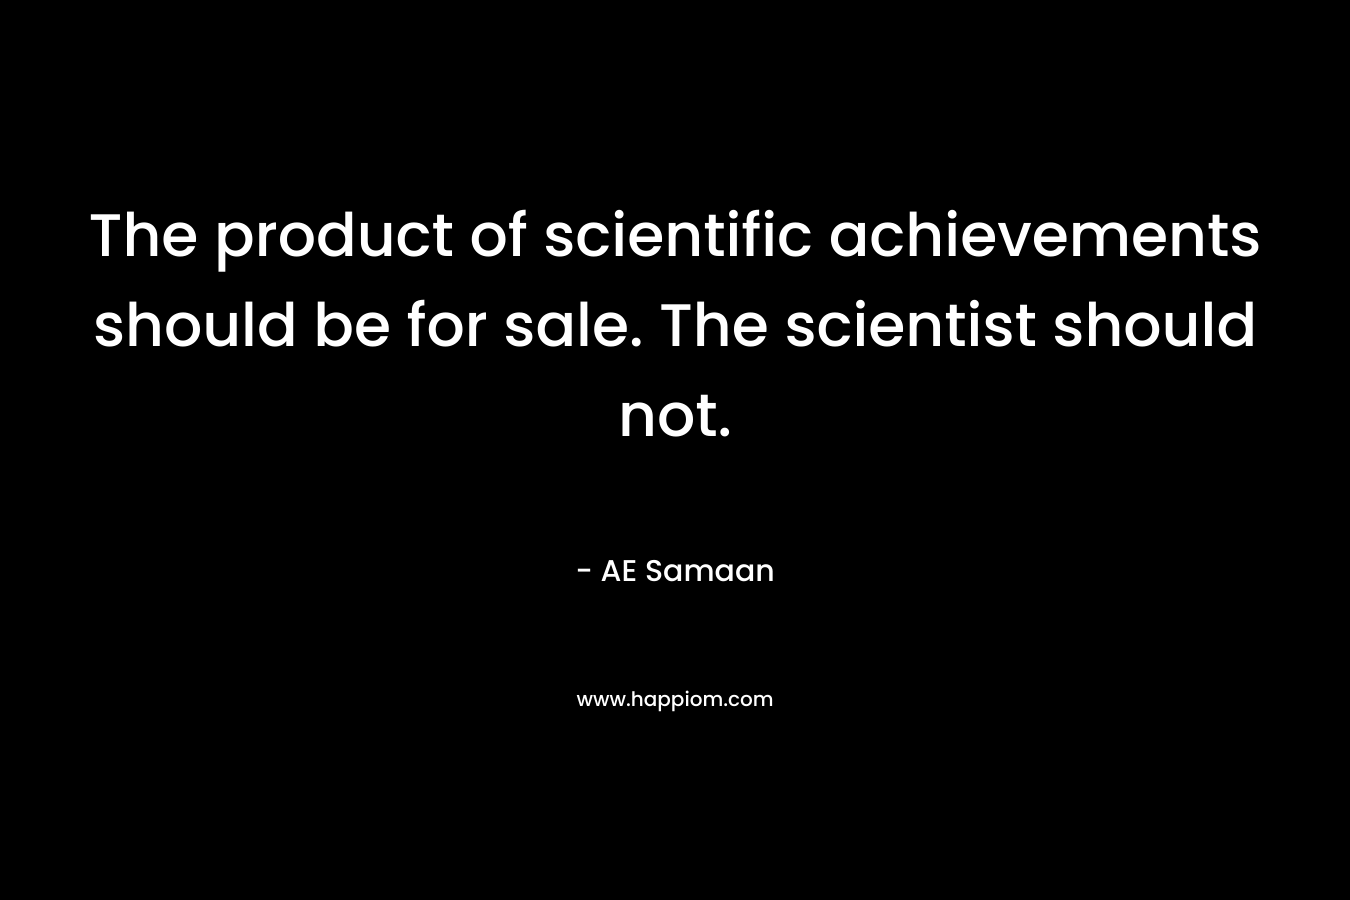 The product of scientific achievements should be for sale. The scientist should not.